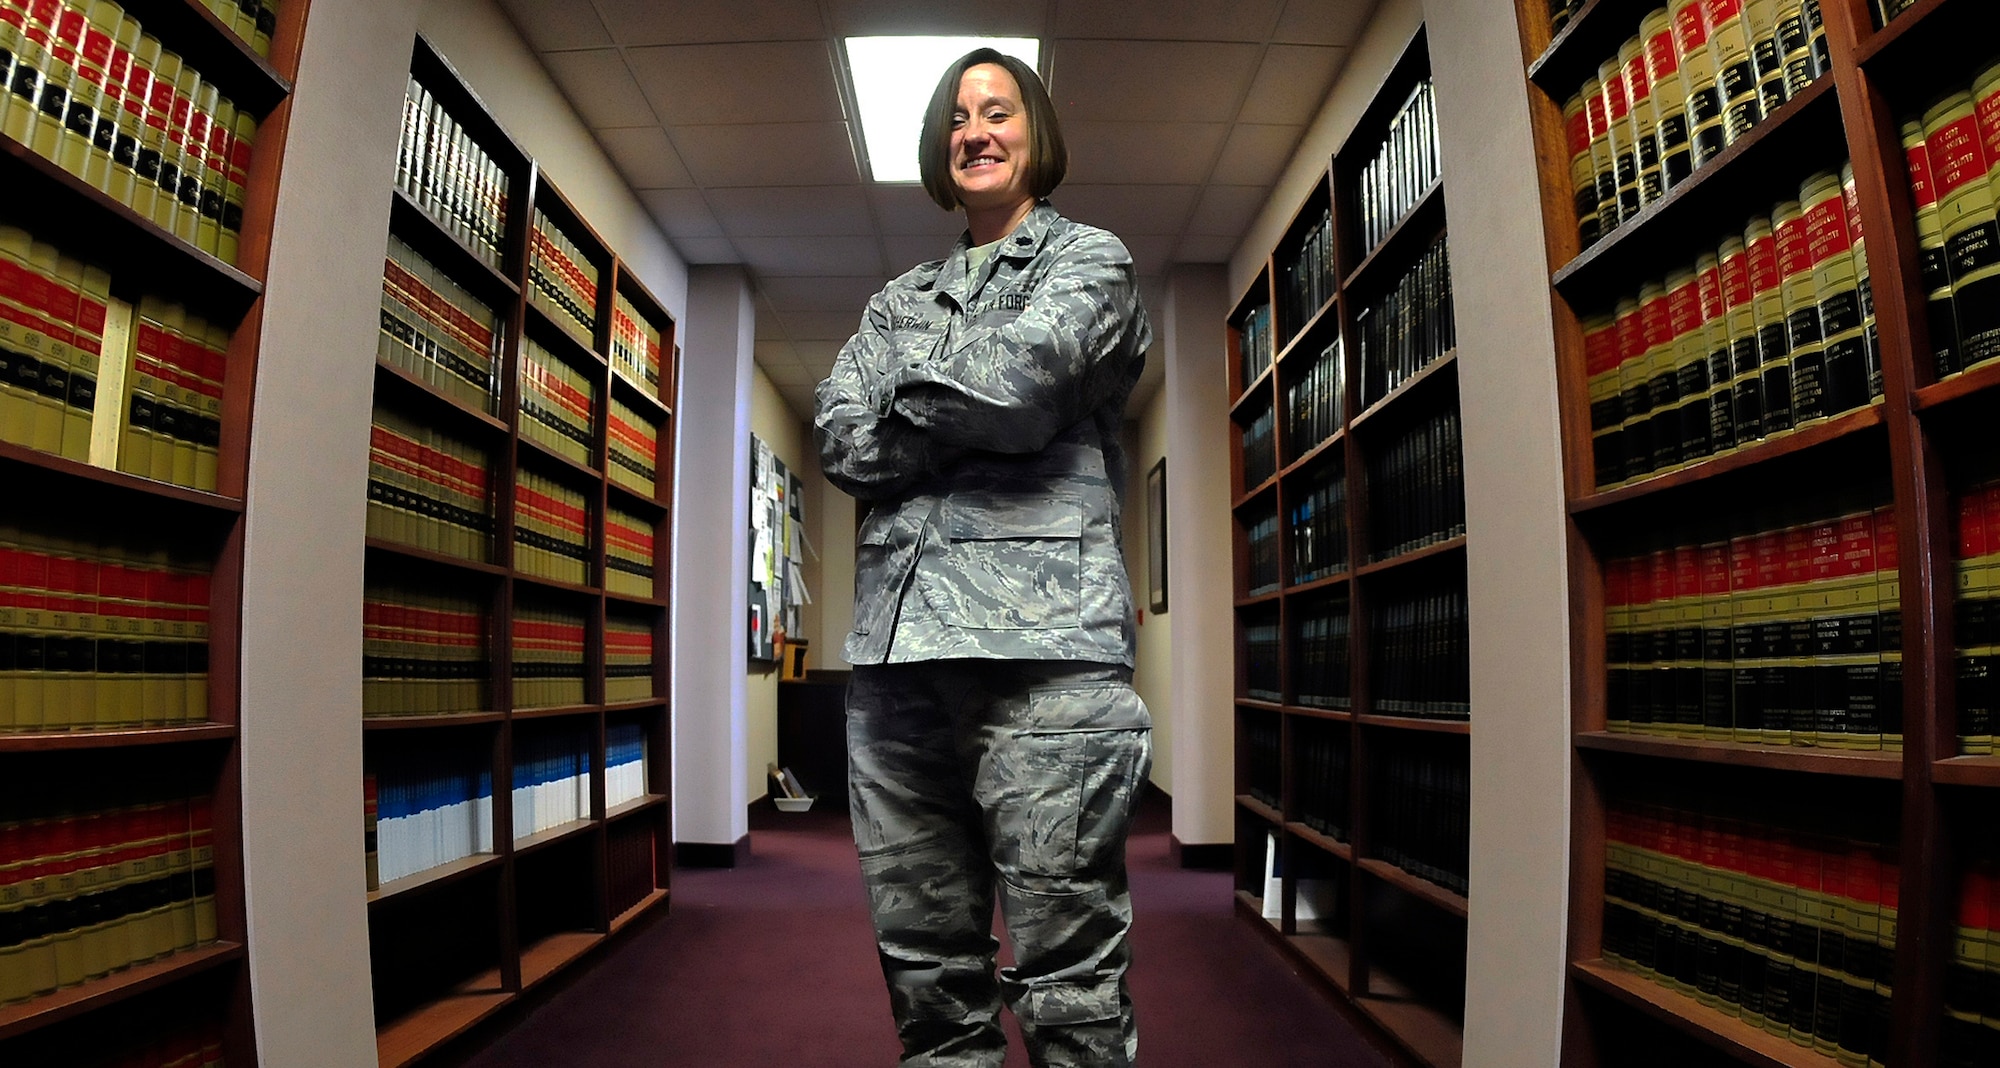 Lt. Col Shannon Sherwin is the 354th Fighter Wing staff judge advocate. As a female field grade officer, she has overcome obstacles that have helped her become an asset to the Air Force while remaining true to herself. (U.S. Air Force photo/Airman 1st Class Zachary Perras)